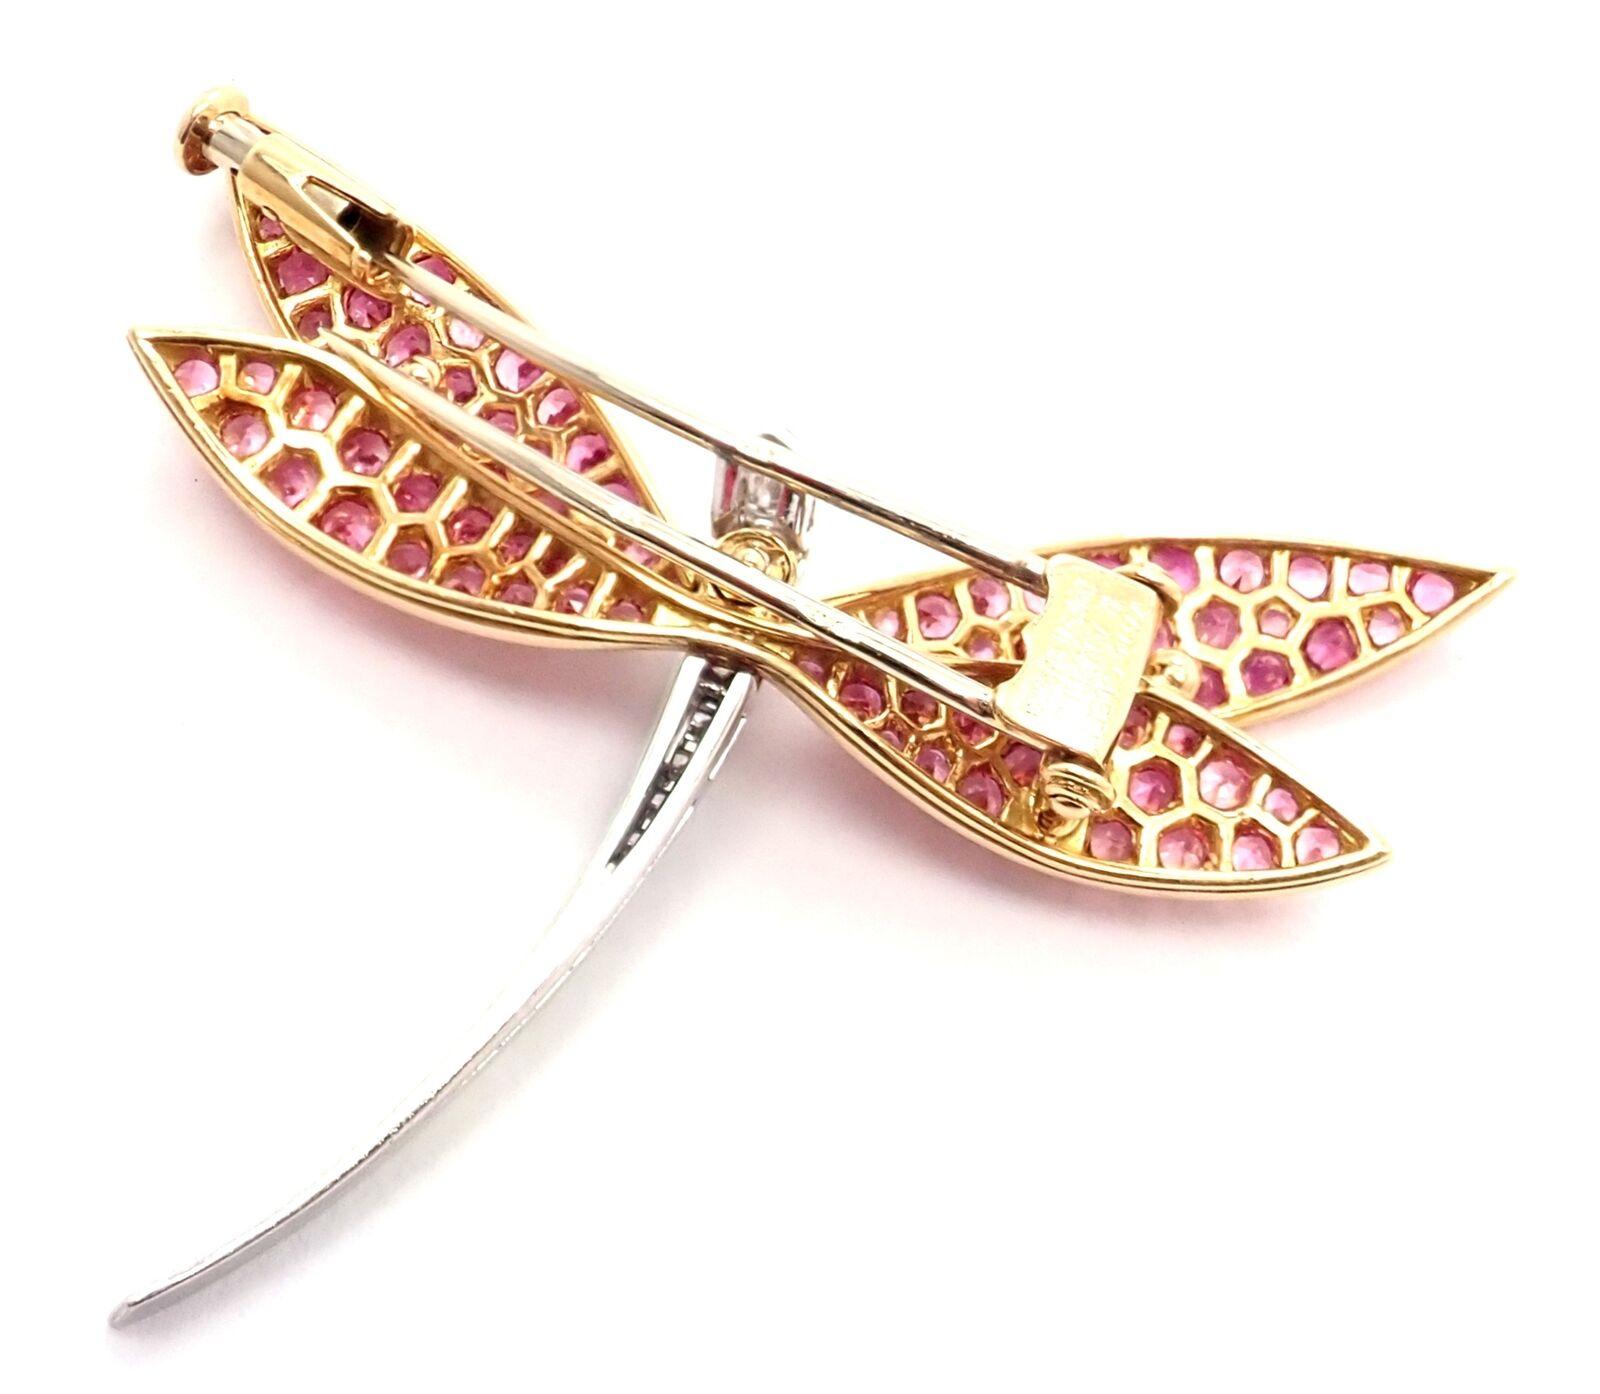 Van Cleef & Arpels Dragonfly Diamond Pink Sapphire White Gold Pin Brooch 4